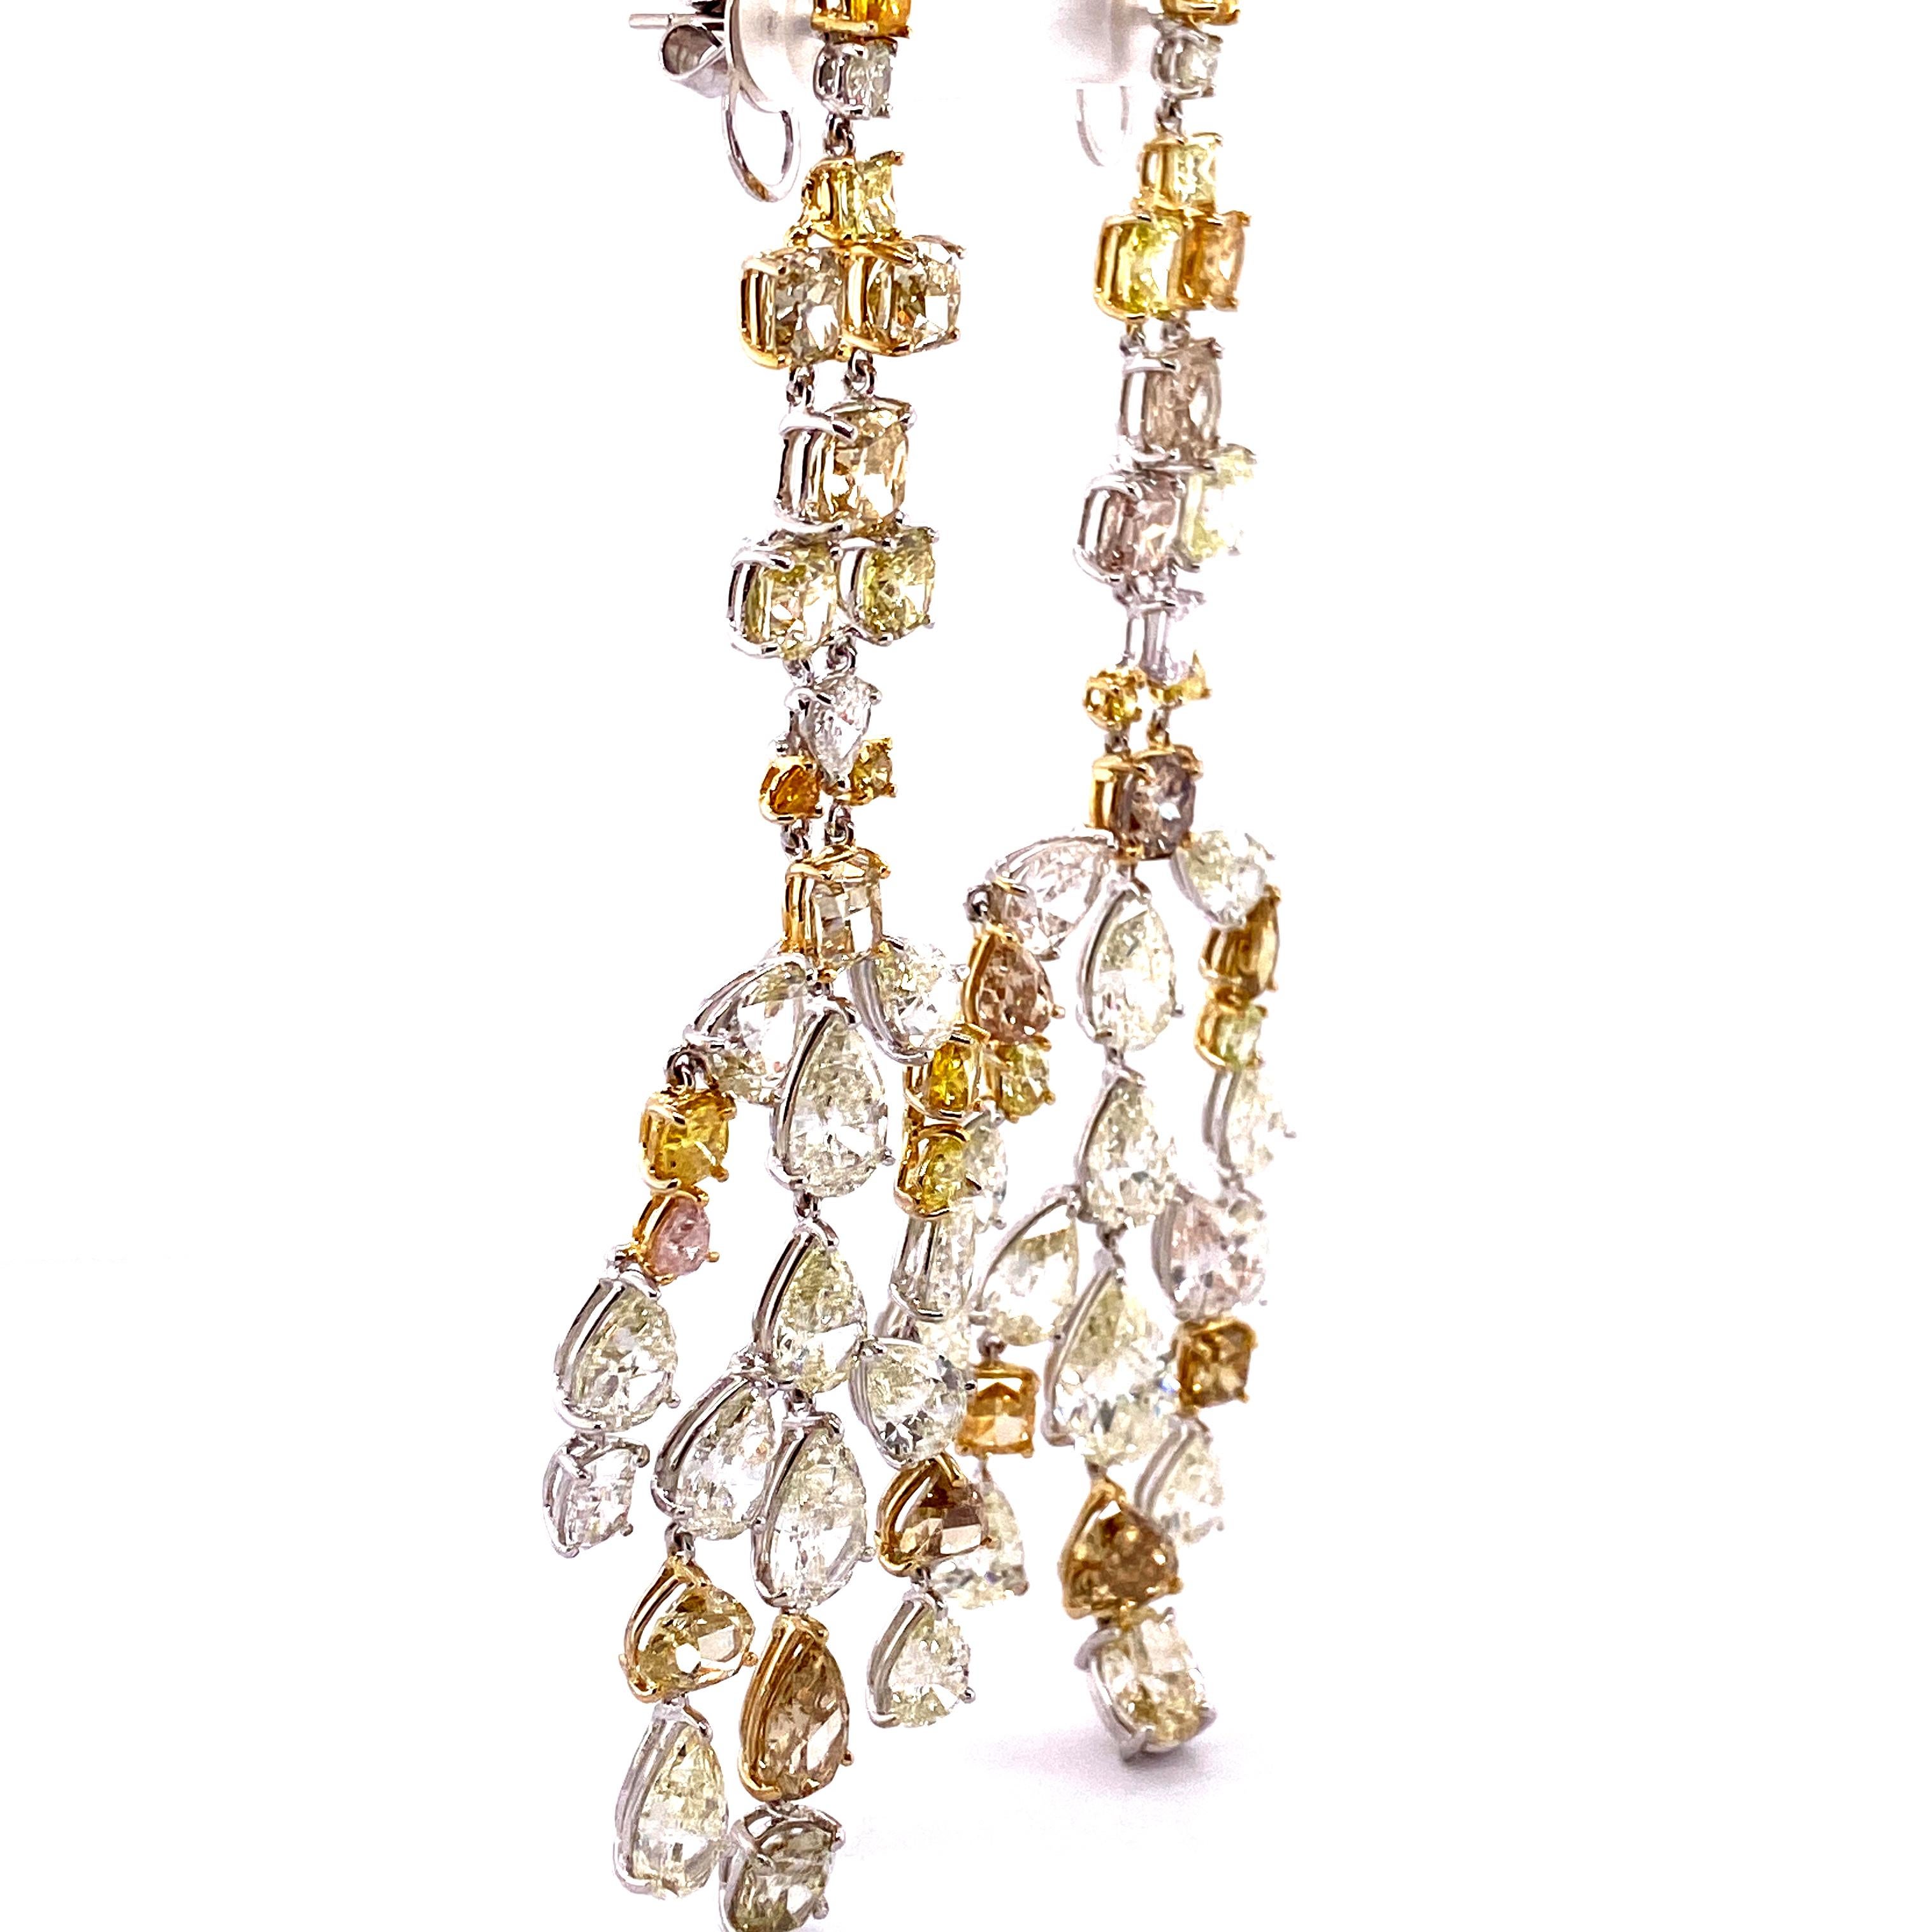 57.64 Carat Fancy Coloured Diamonds and White Diamond Chandelier Gold Earrings For Sale 1